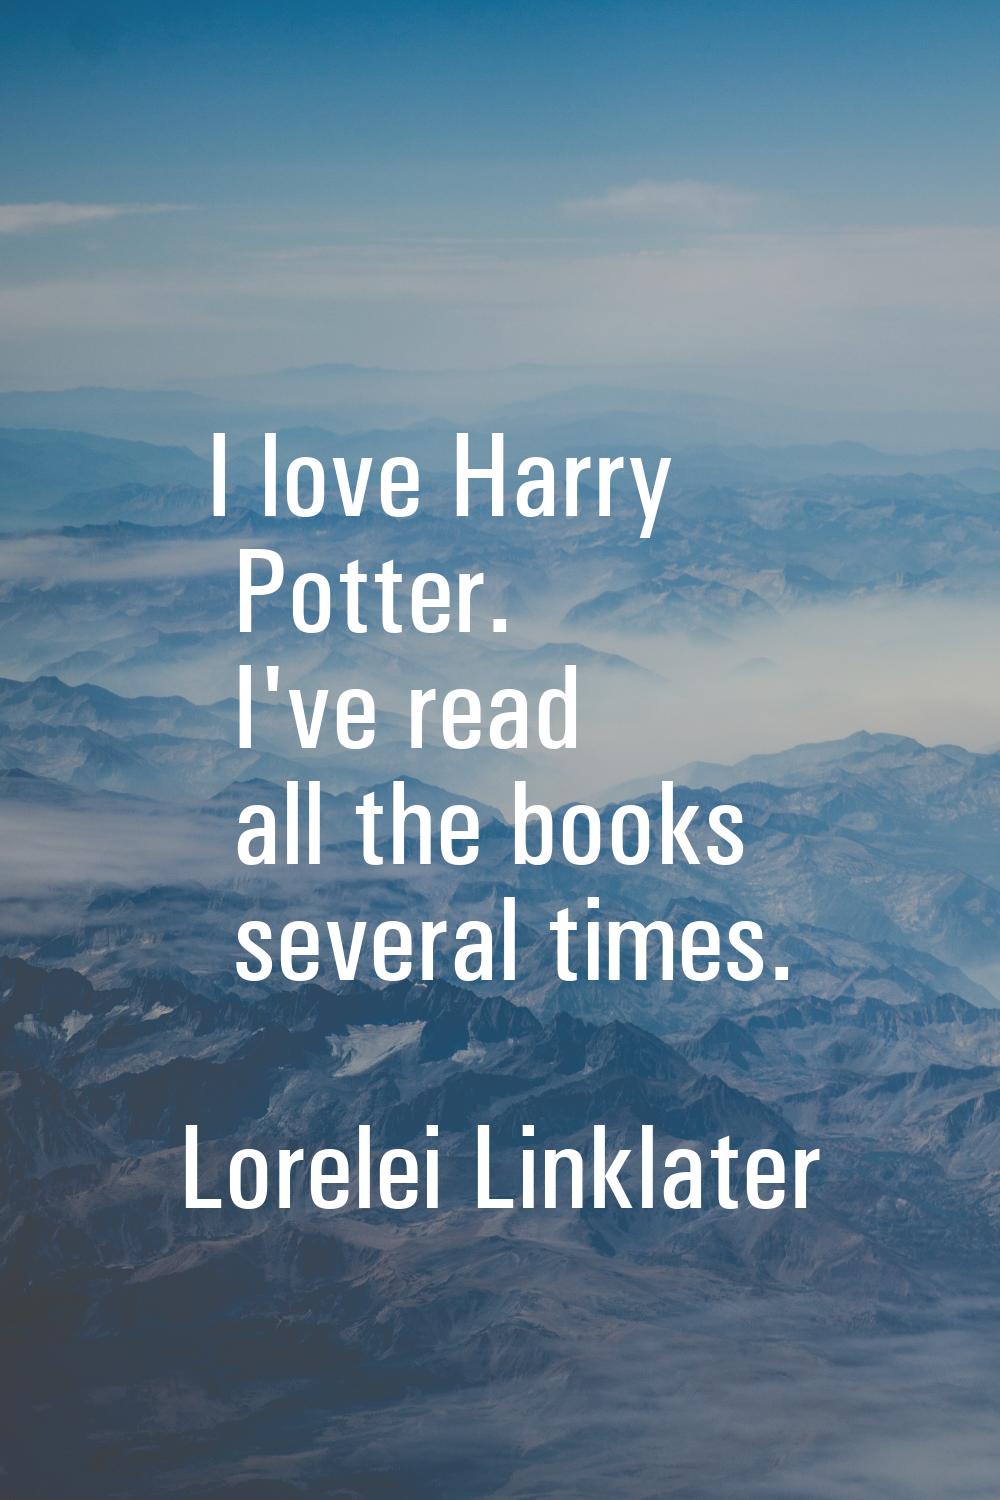 I love Harry Potter. I've read all the books several times.